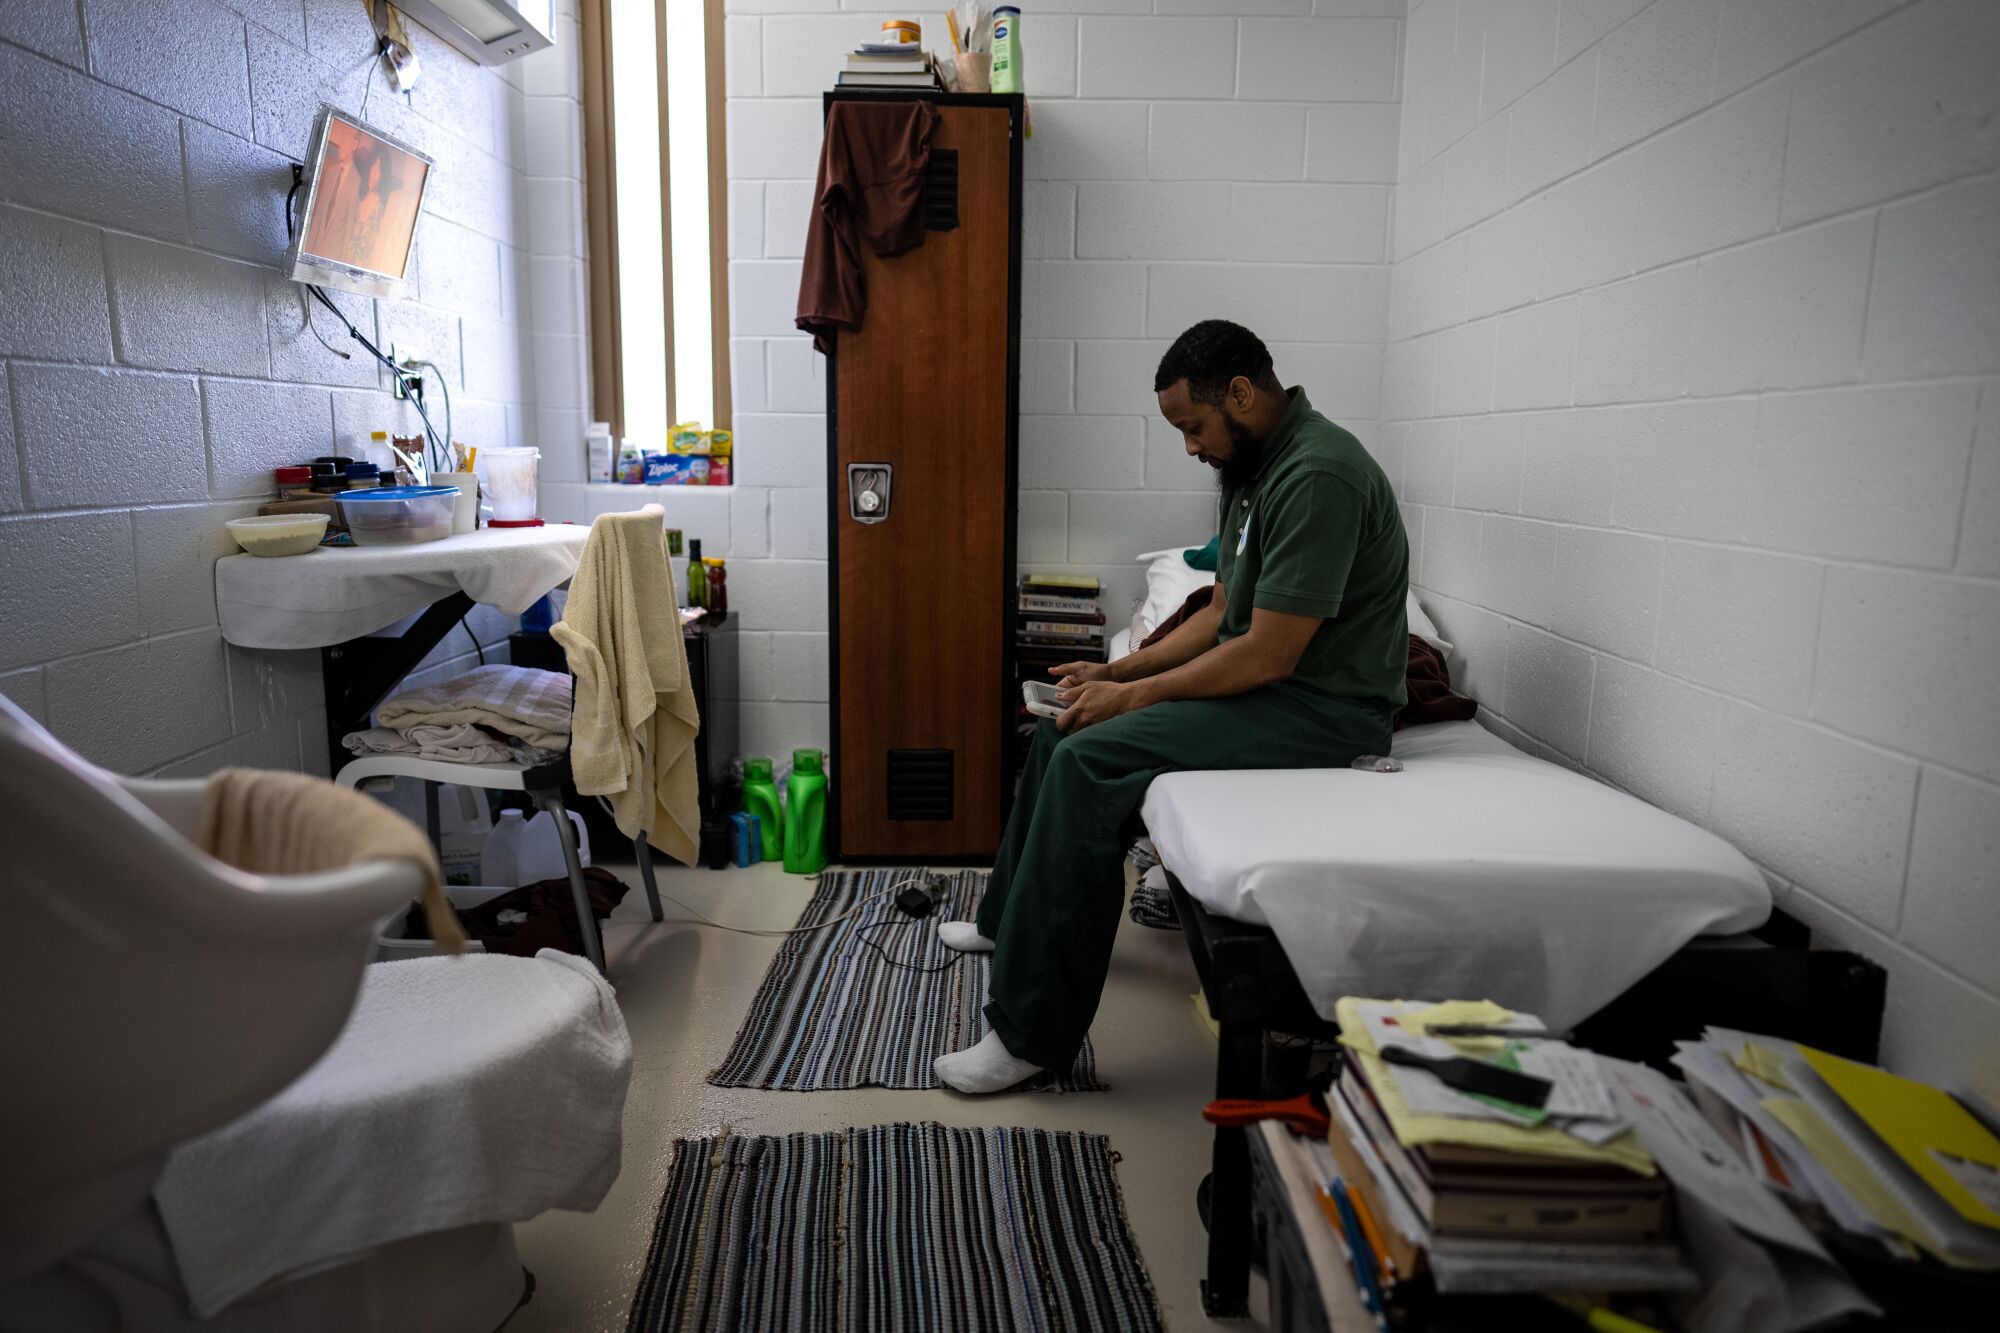 Inmate Joseph sits on the bed inside his cell in the "Little Scandinavia" unit.